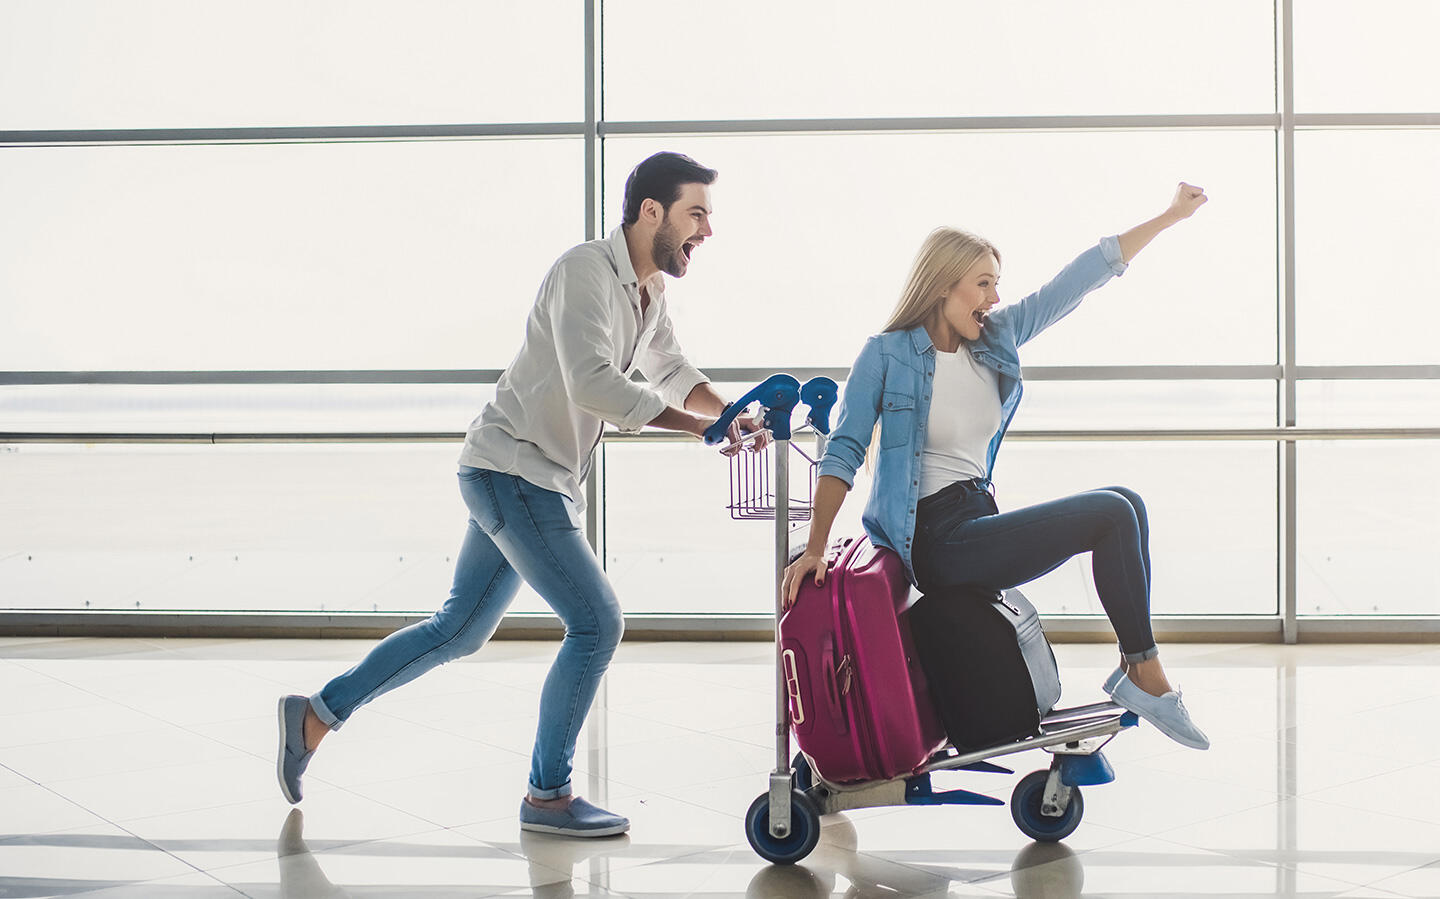 A happy couple hurrying with their luggage at Nantes airport, a man pushing a smiling woman on a luggage trolley.